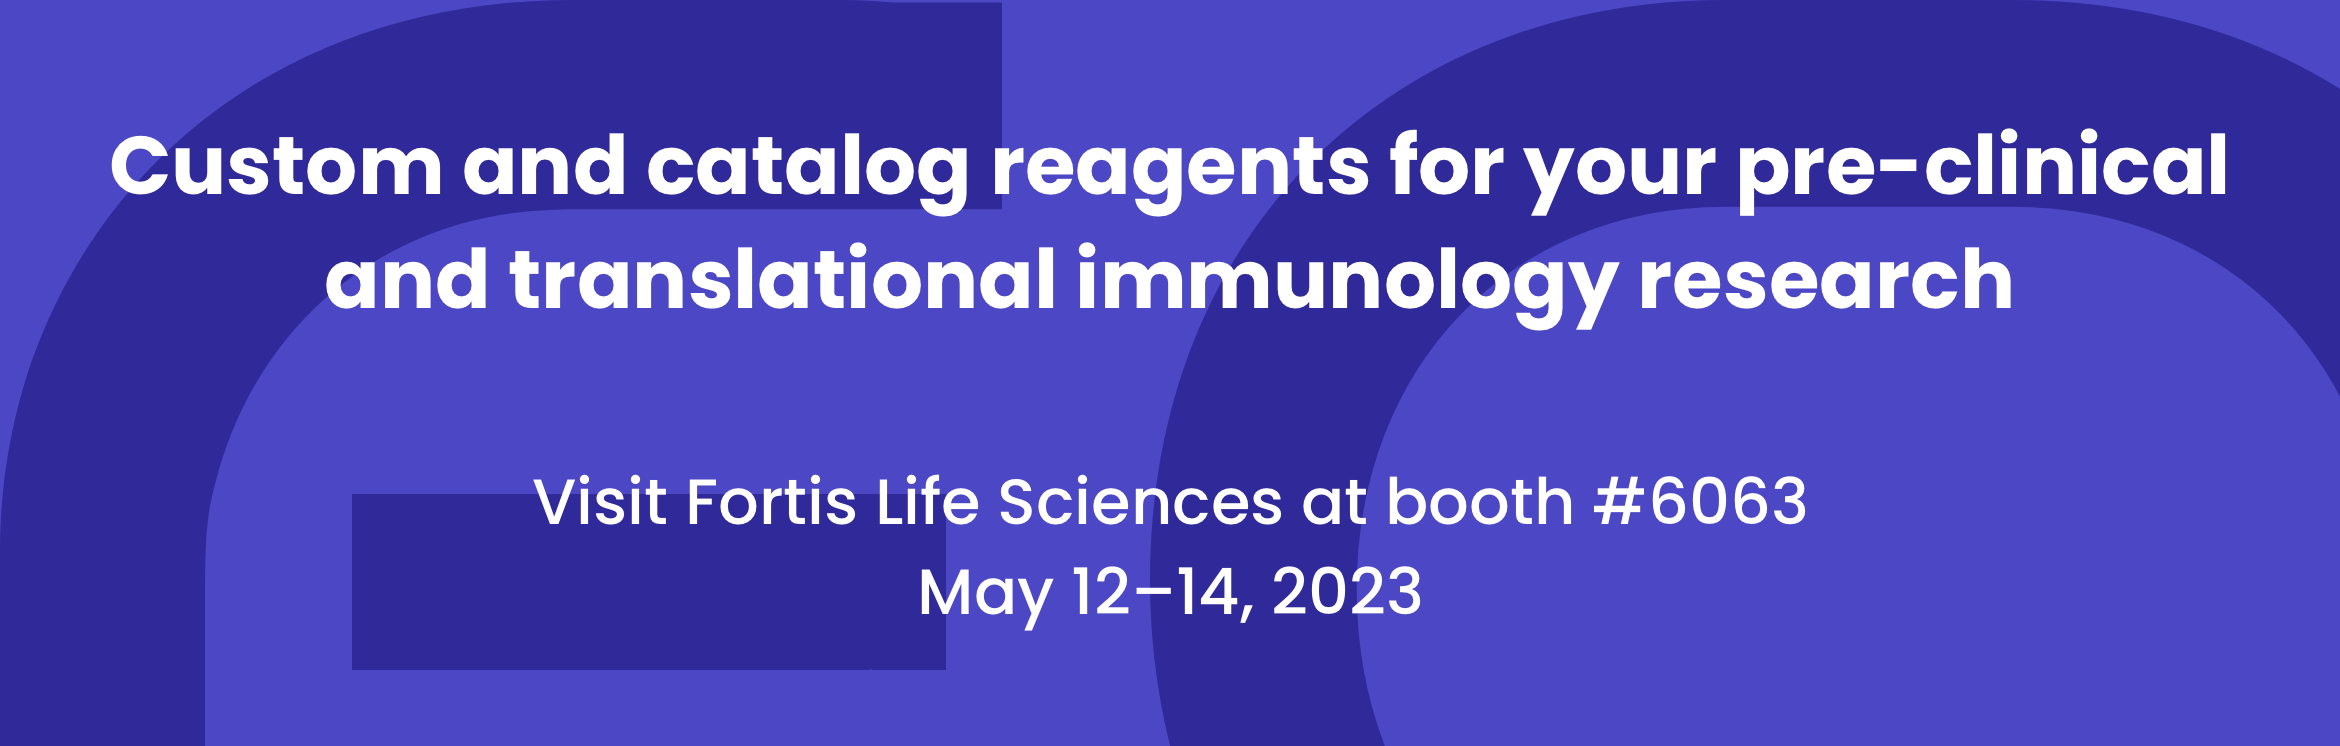 Custom and catalog reagents for your pre-clinical and translational immunology research 